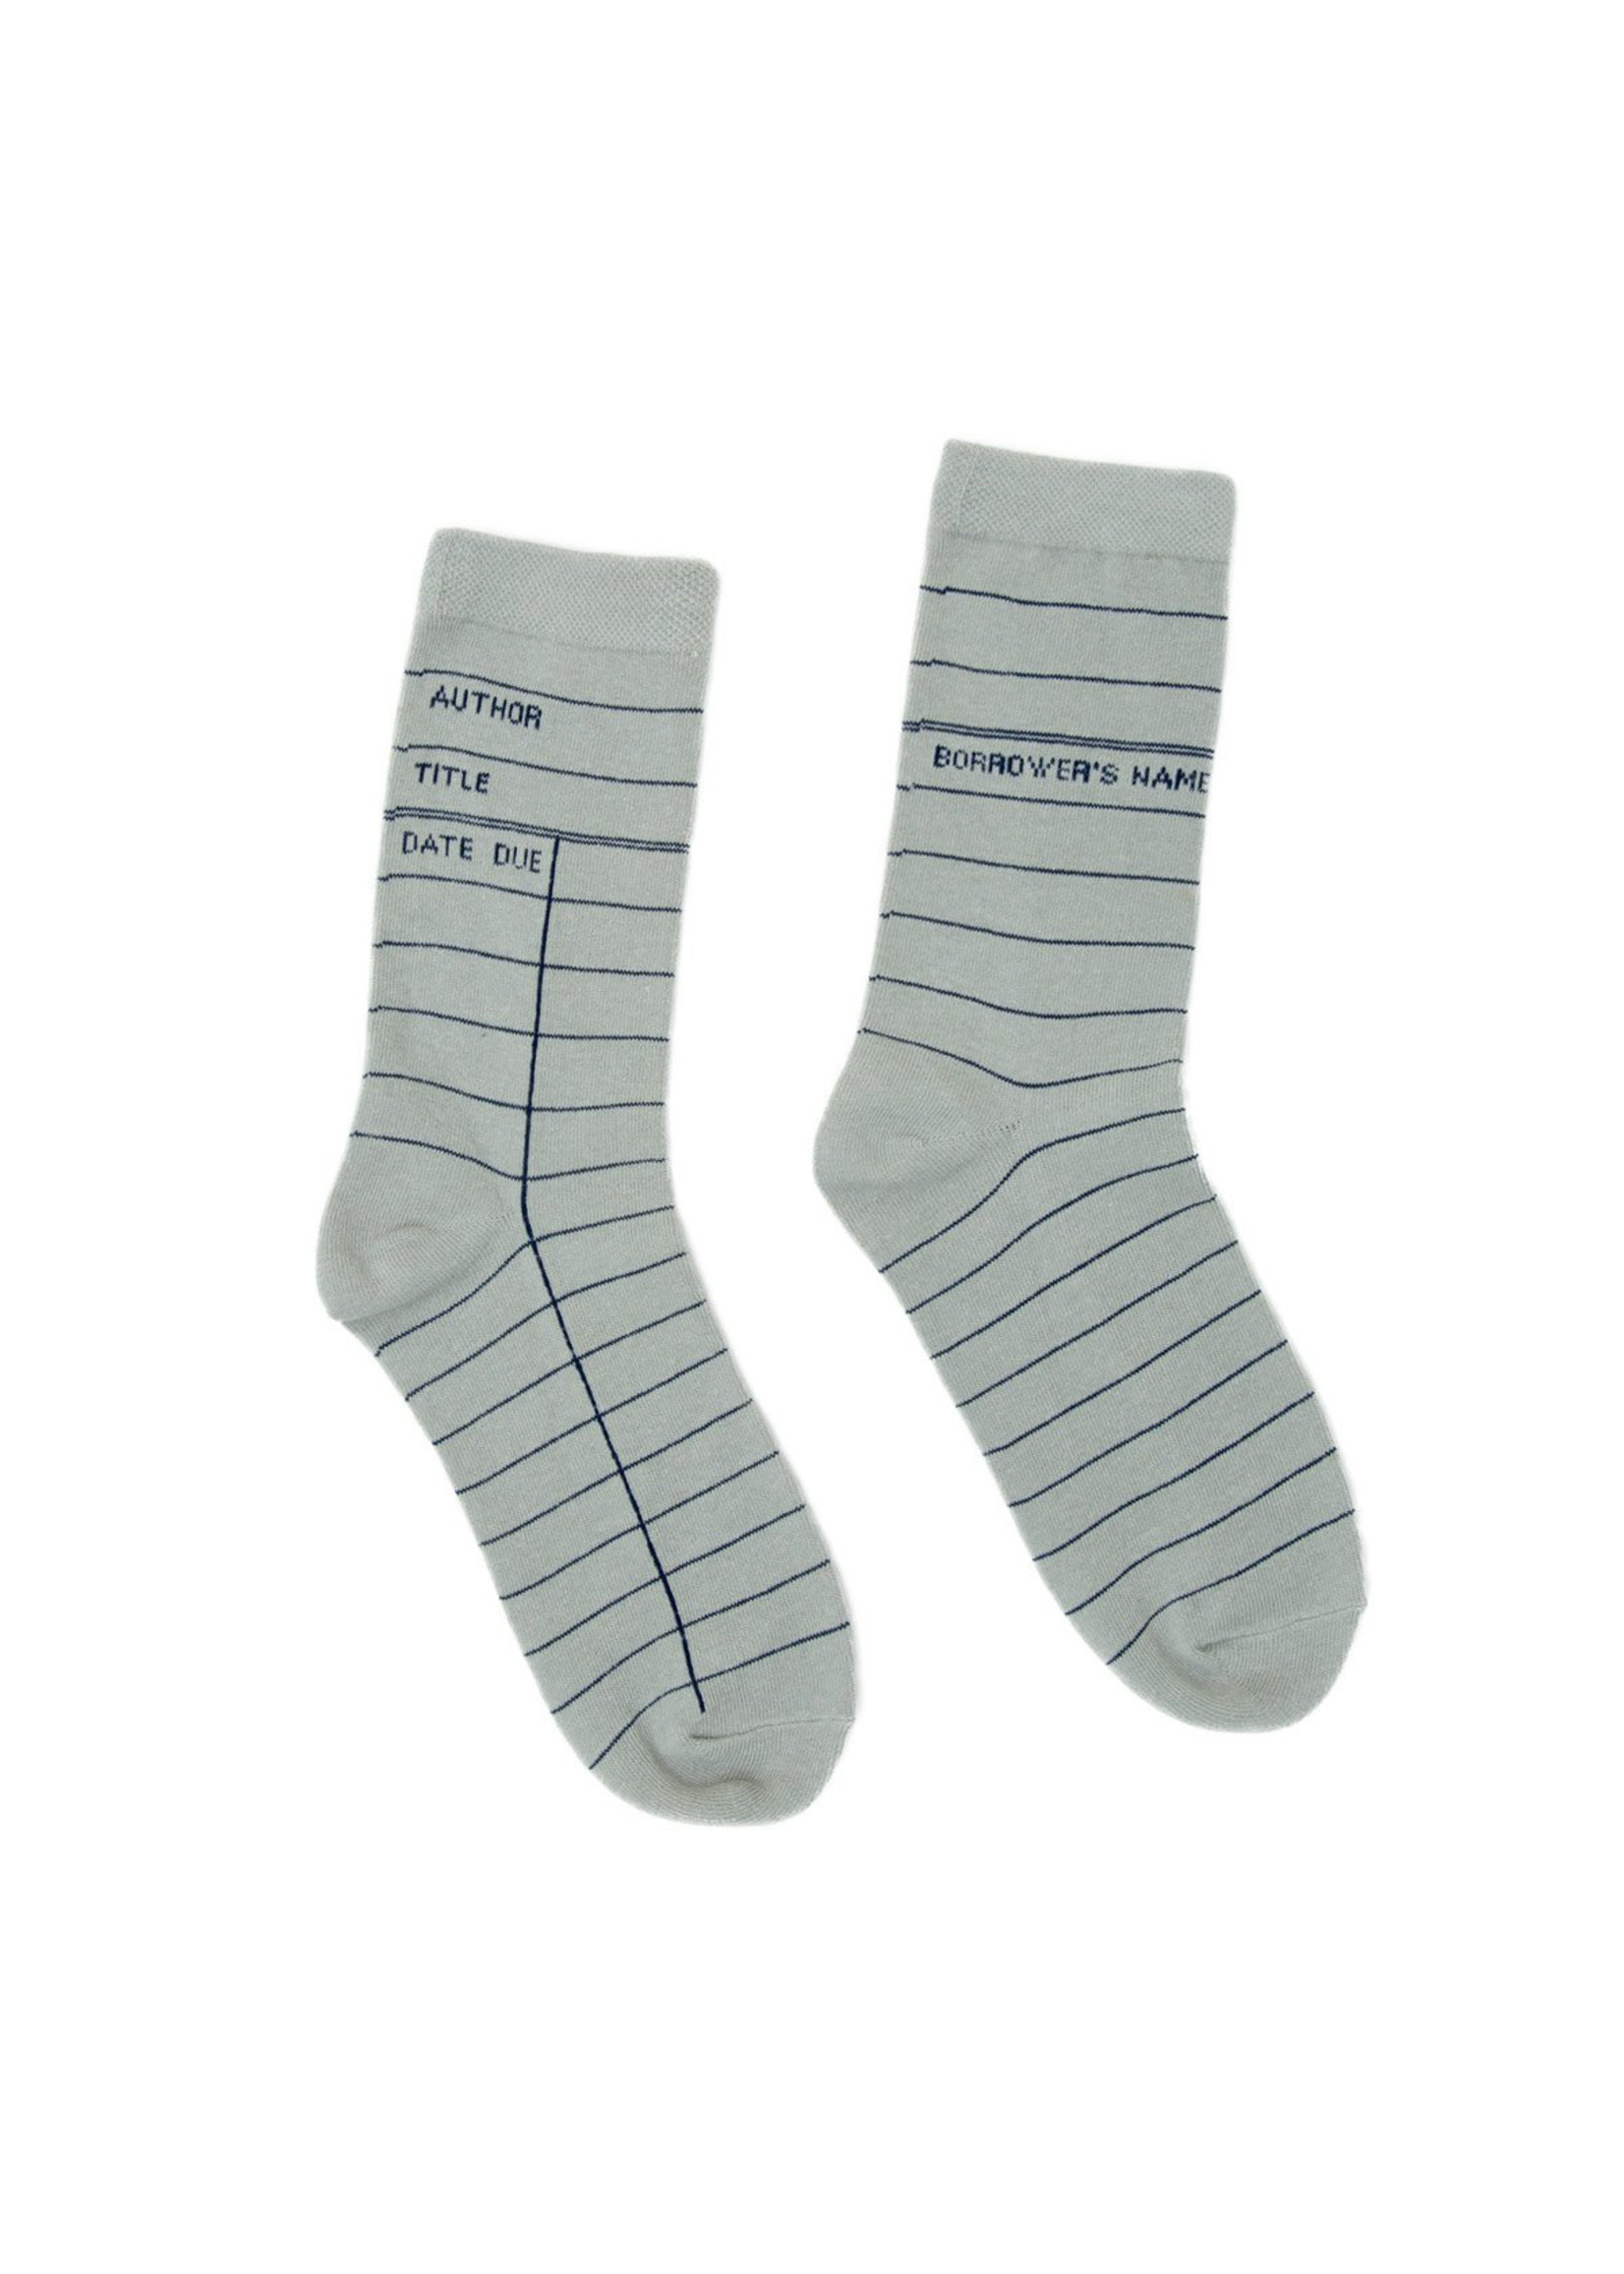 Out of Print Library Card Socks - Adult